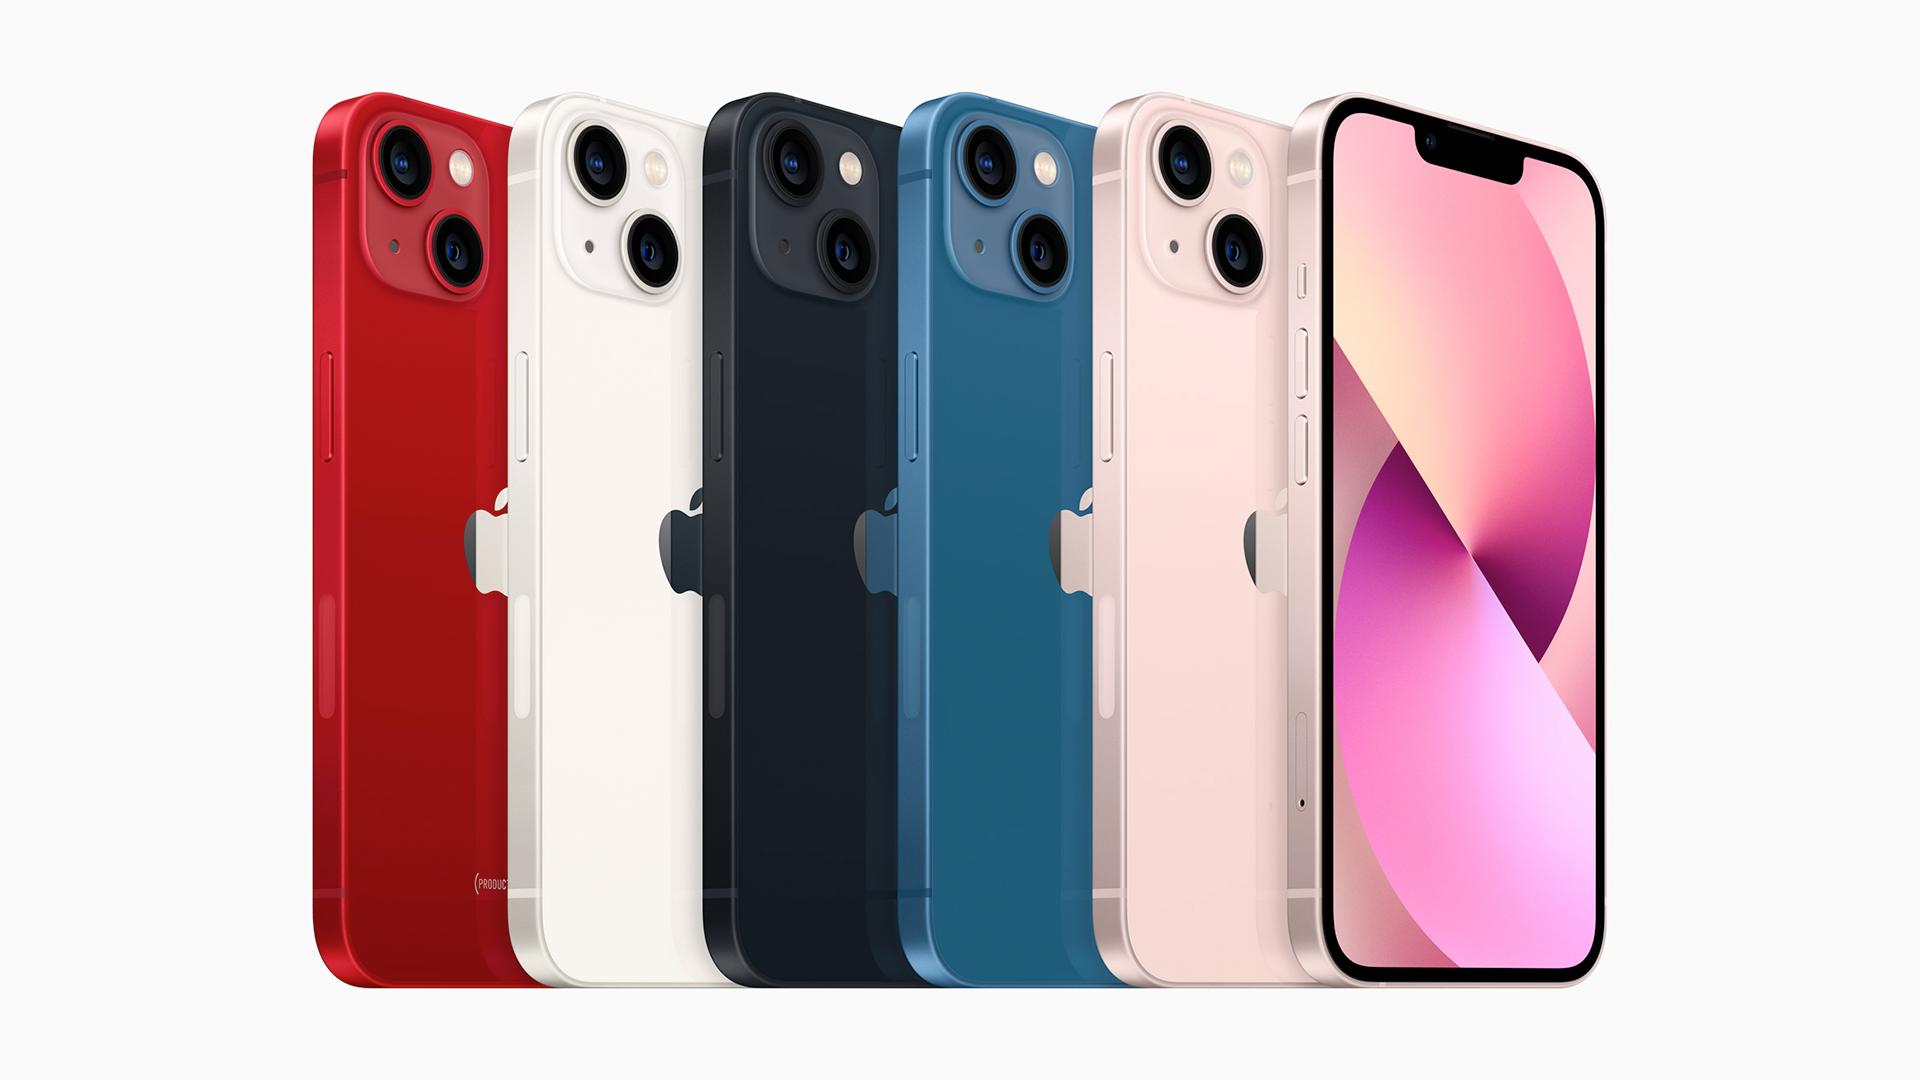 The full iPhone 13 lineup.